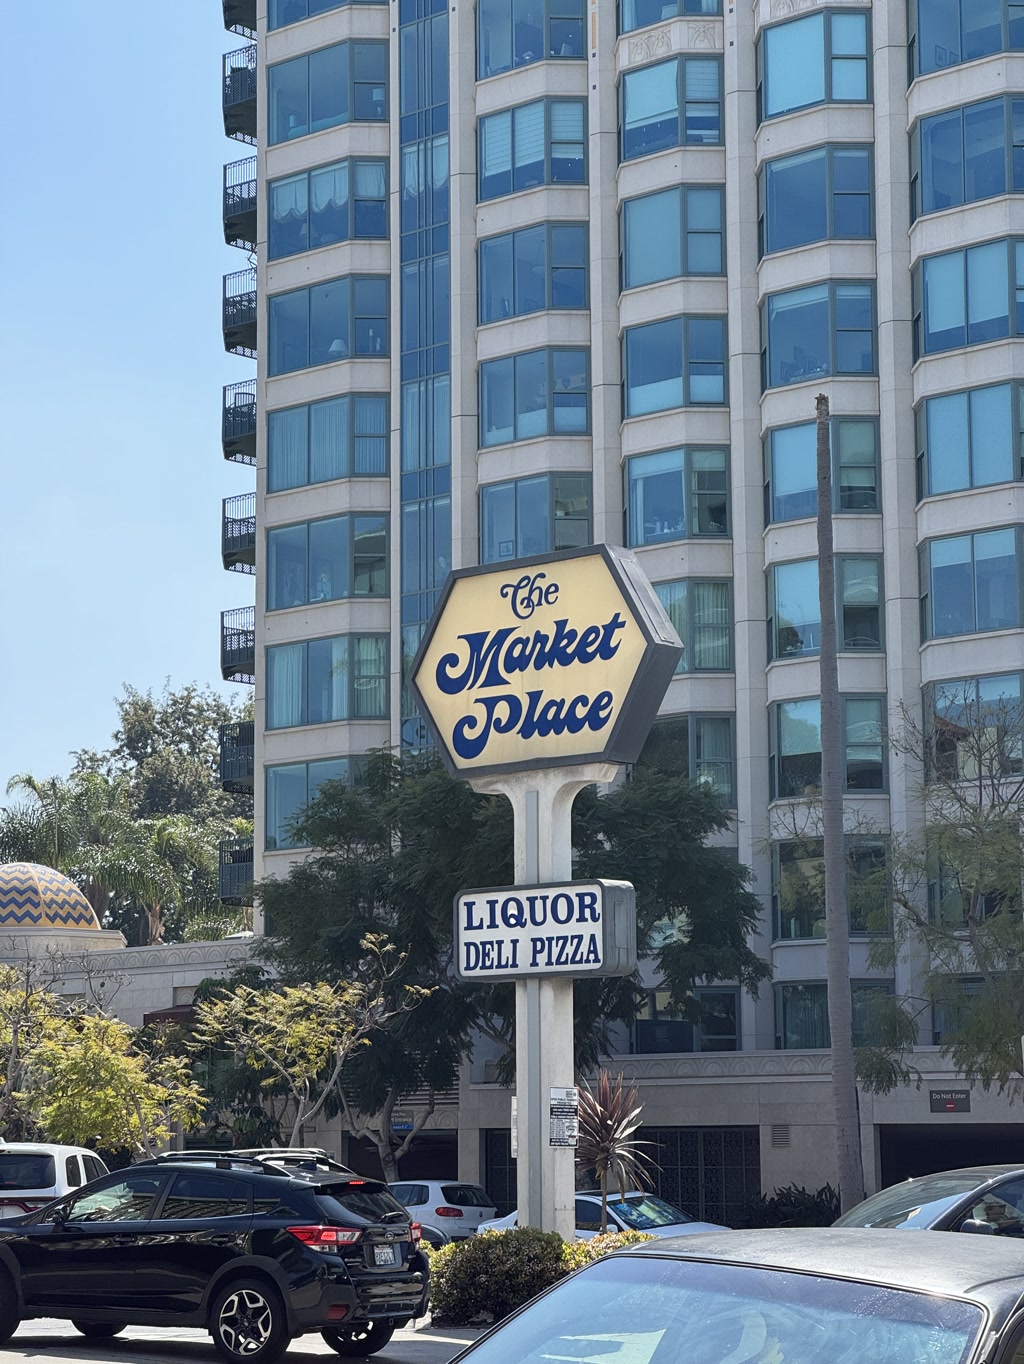 A distinctive sign with an ornate, cursive font presents the name 'The Market Place' against a hexagonal backdrop with a dark blue border. Below it, a rectangular sign in a simpler, bold typeface lists the amenities available: 'LIQUOR DELI PIZZA.' The sign stands out in front of a multi-storied building with numerous balconies and reflective windows. Tall palm trees and a clear blue sky suggest a sunny, warm environment. Parked and moving cars indicate the presence of a busy street.